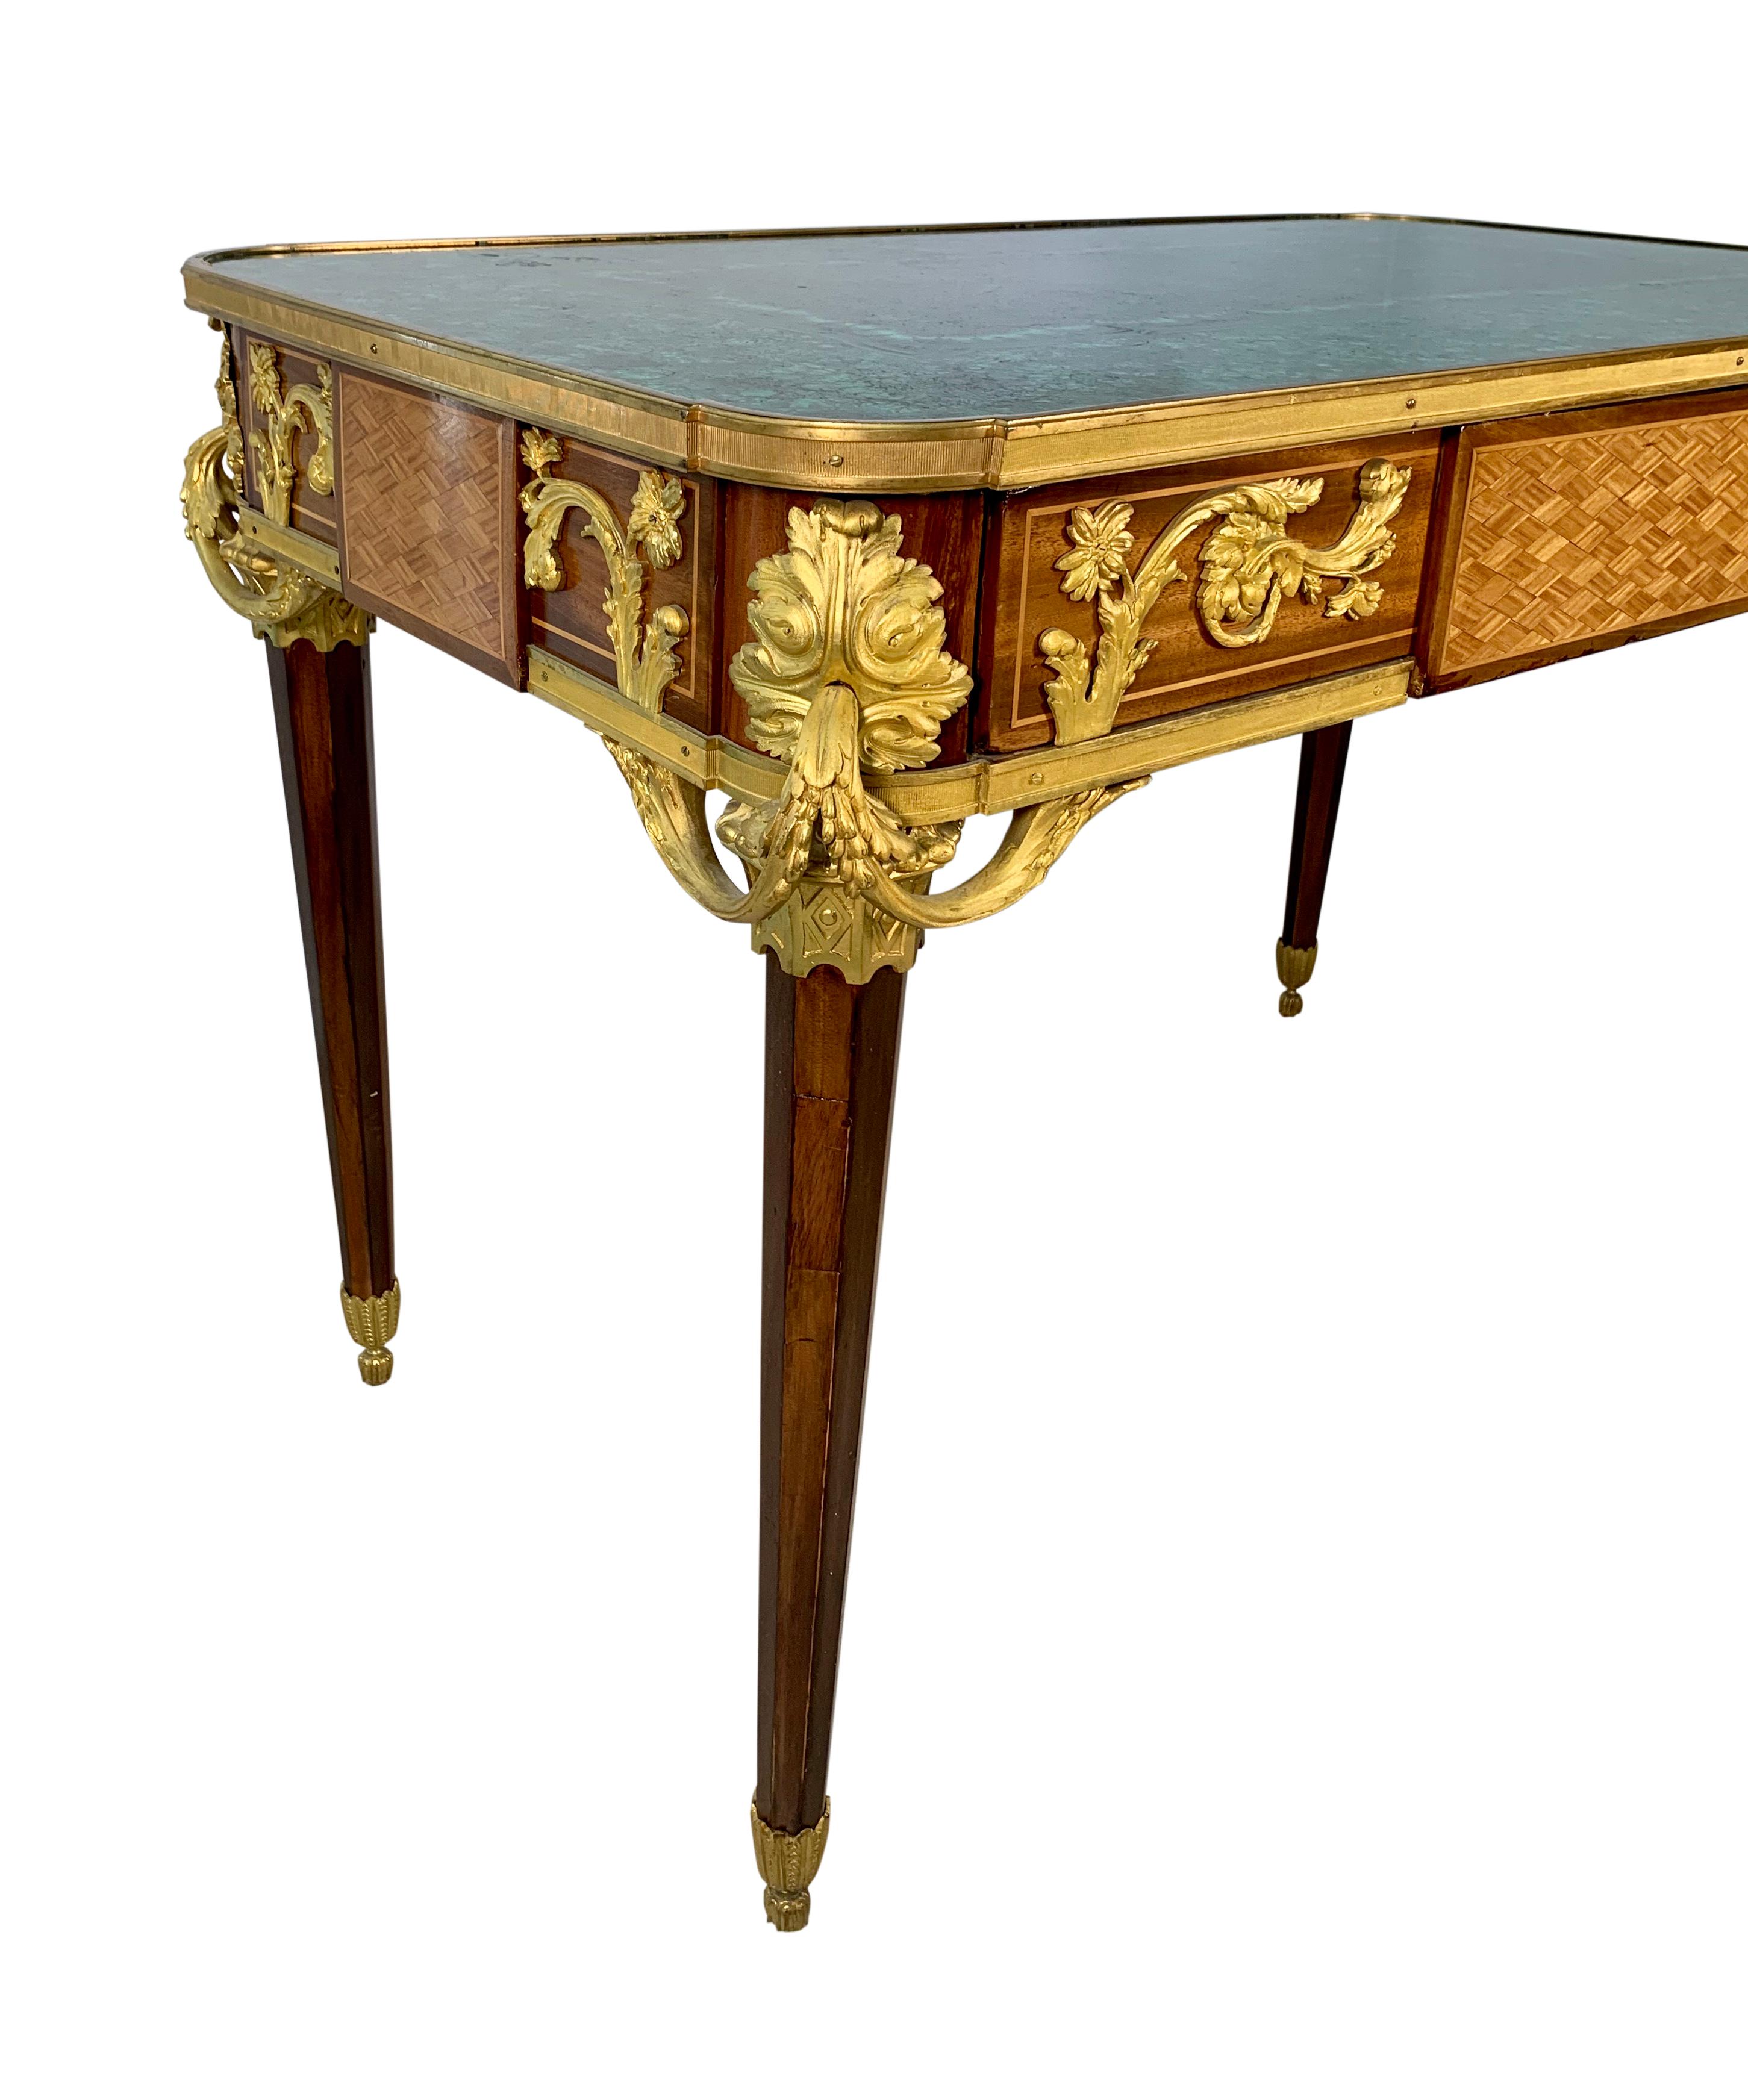 20th Century Antique French Ormolu Mounted Malachite Top Center Table / desk For Sale